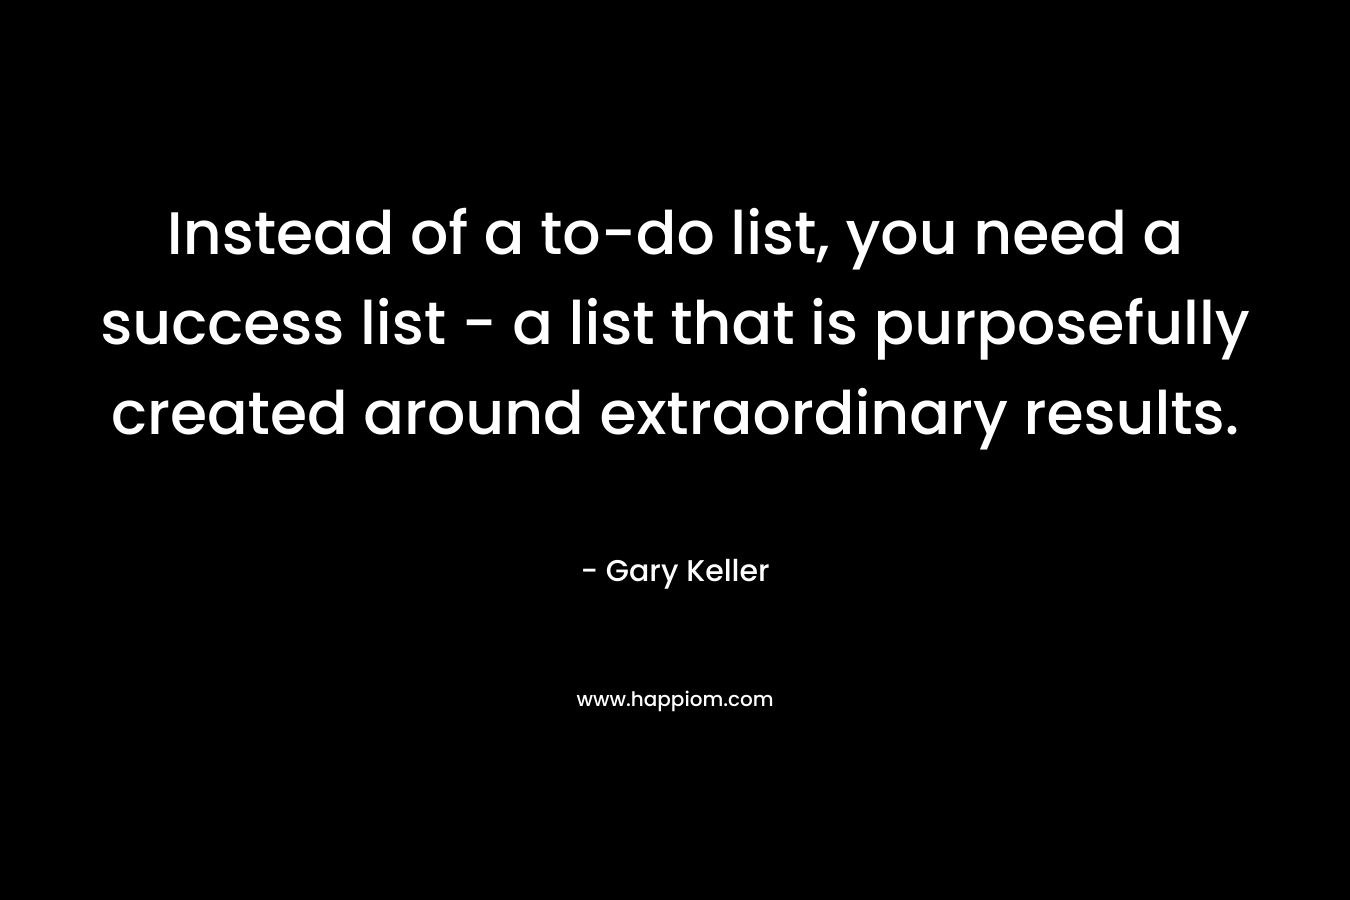 Instead of a to-do list, you need a success list - a list that is purposefully created around extraordinary results.